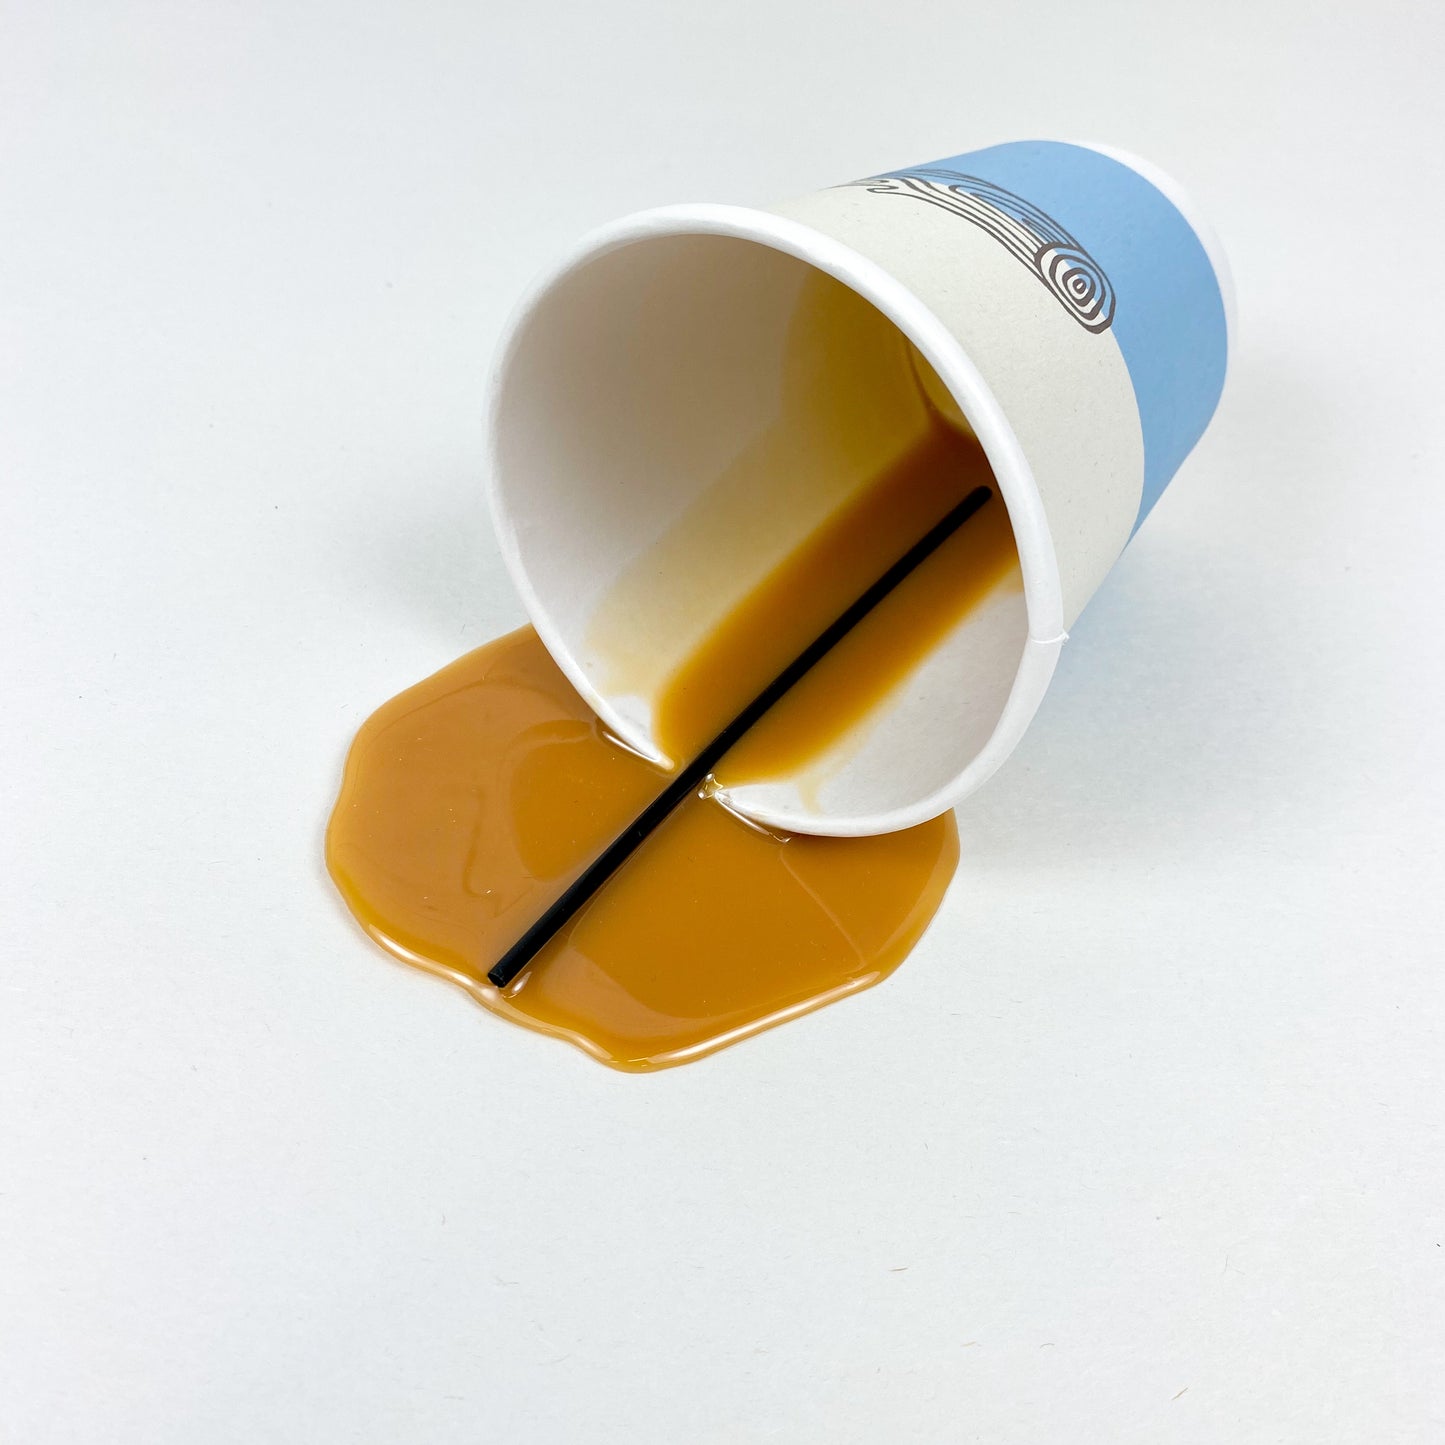 Spilled To Go Cup of Coffee